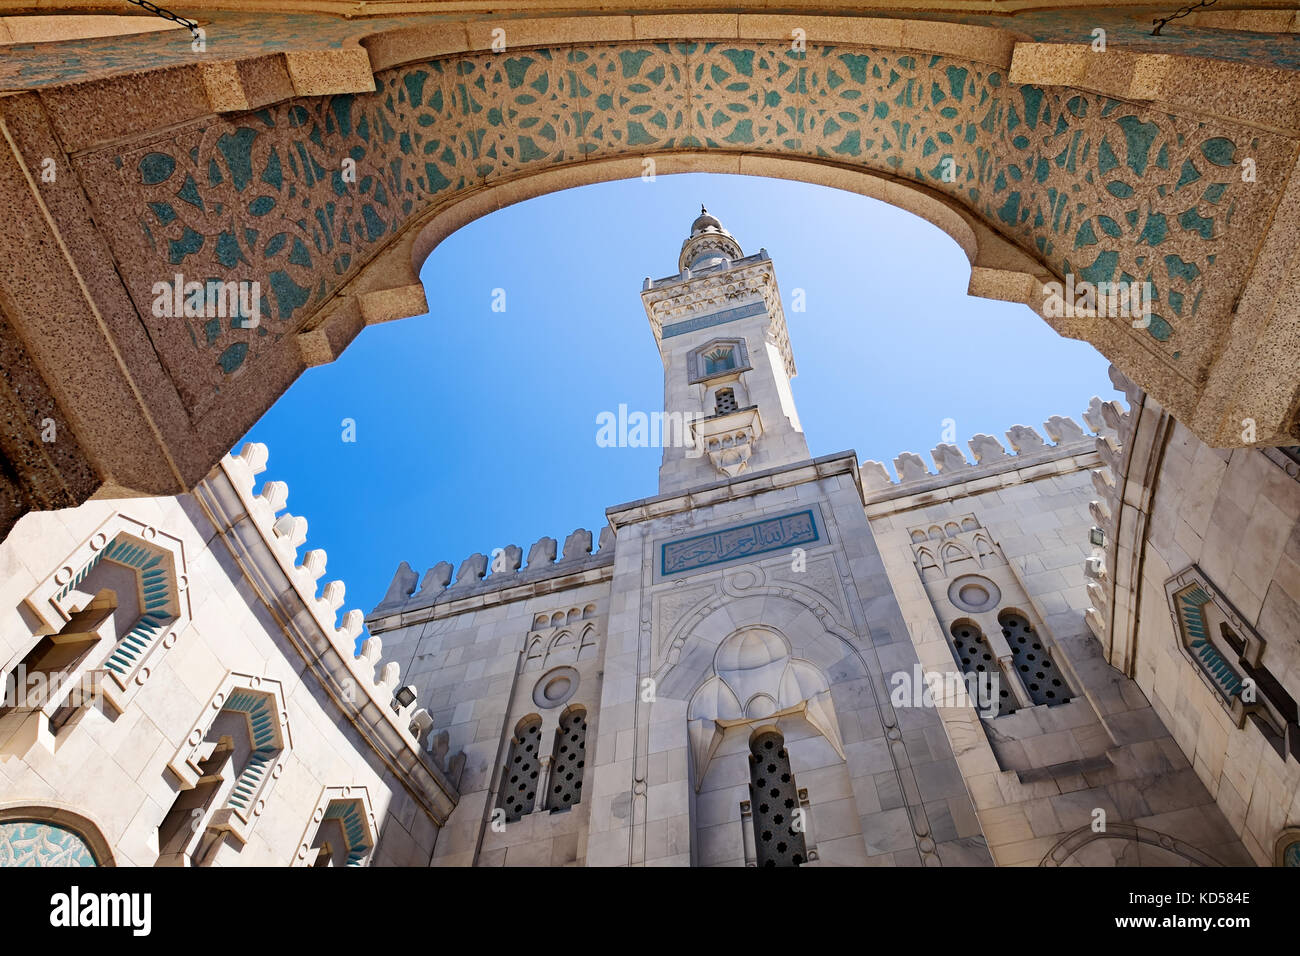 Washington DC Islamic Center mosque, which opened in 1957. View is  looking up from the interior courtyard, at the minaret seen against the blue sky. Stock Photo